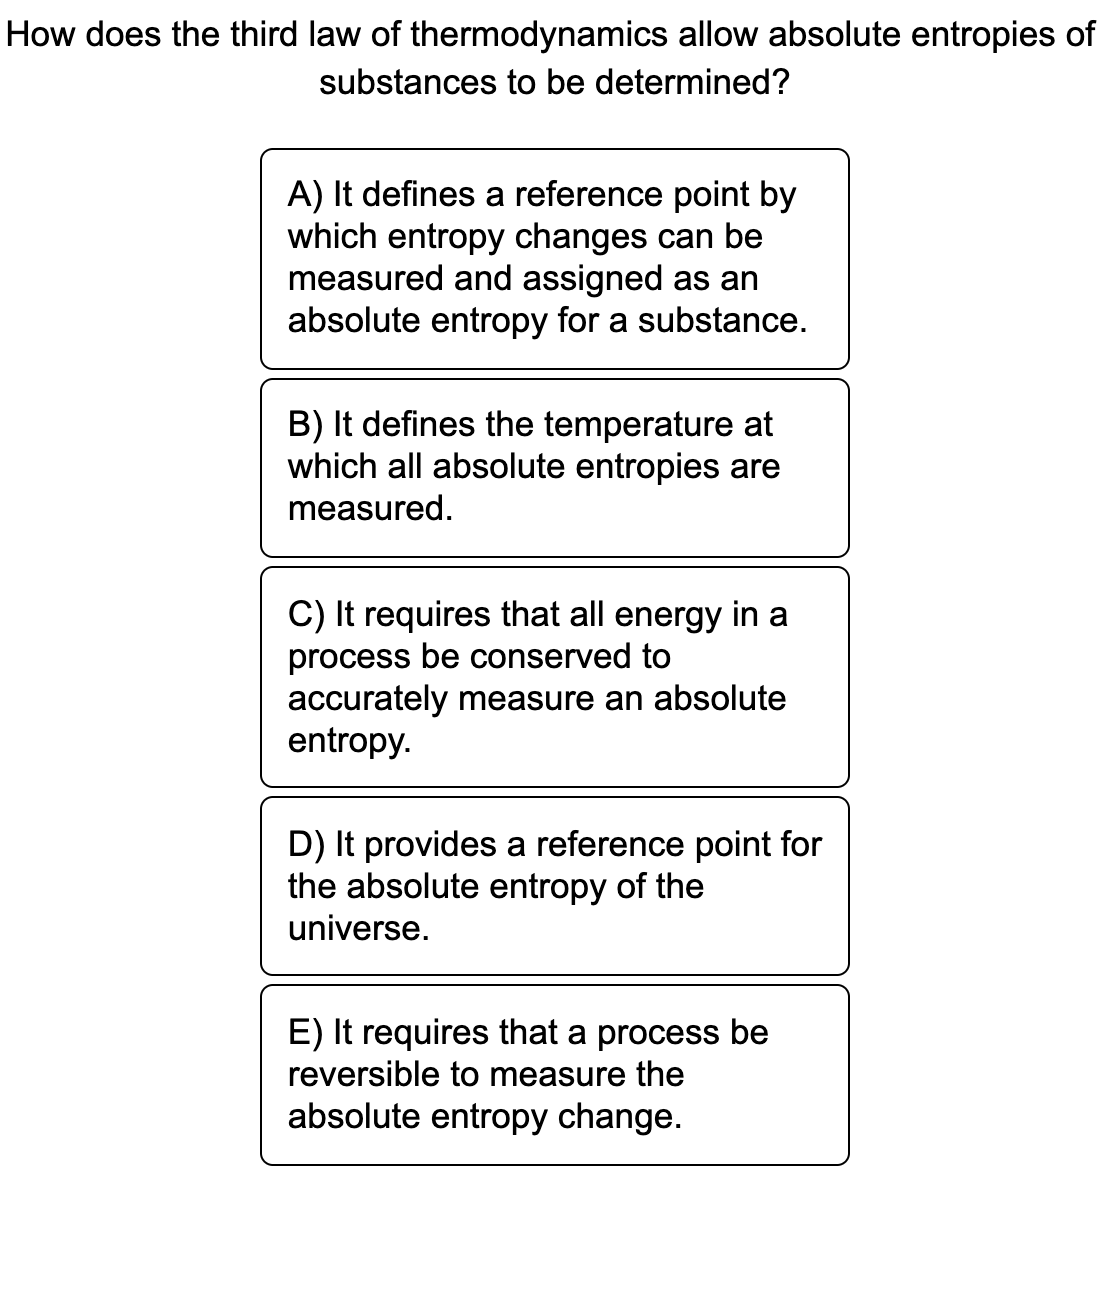 How does the third law of thermodynamics allow absolute entropies of
substances to be determined?
A) It defines a reference point by
which entropy changes can be
measured and assigned as an
absolute entropy for a substance.
B) It defines the temperature at
which all absolute entropies are
measured.
C) It requires that all energy in a
process be conserved to
accurately measure an absolute
entropy.
D) It provides a reference point for
the absolute entropy of the
universe.
E) It requires that a process be
reversible to measure the
absolute entropy change.
